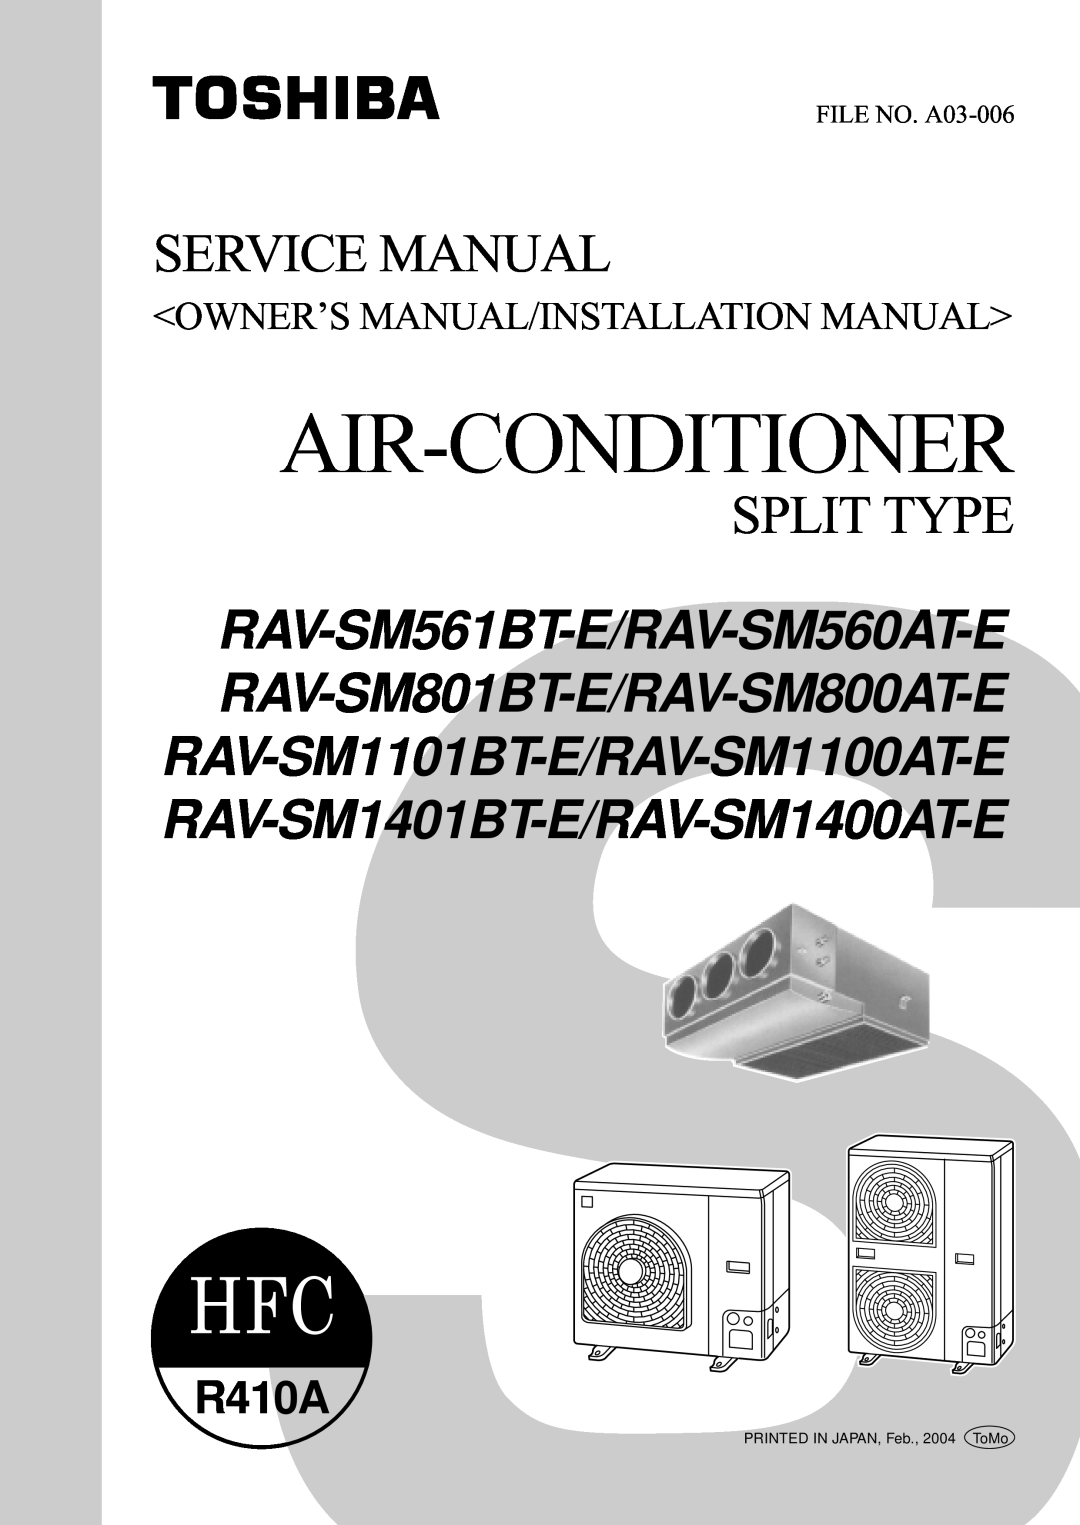 Toshiba R410A service manual Service Manual, Split Type, <Owner’S Manual/Installation Manual>, FILE NO. A03-006 